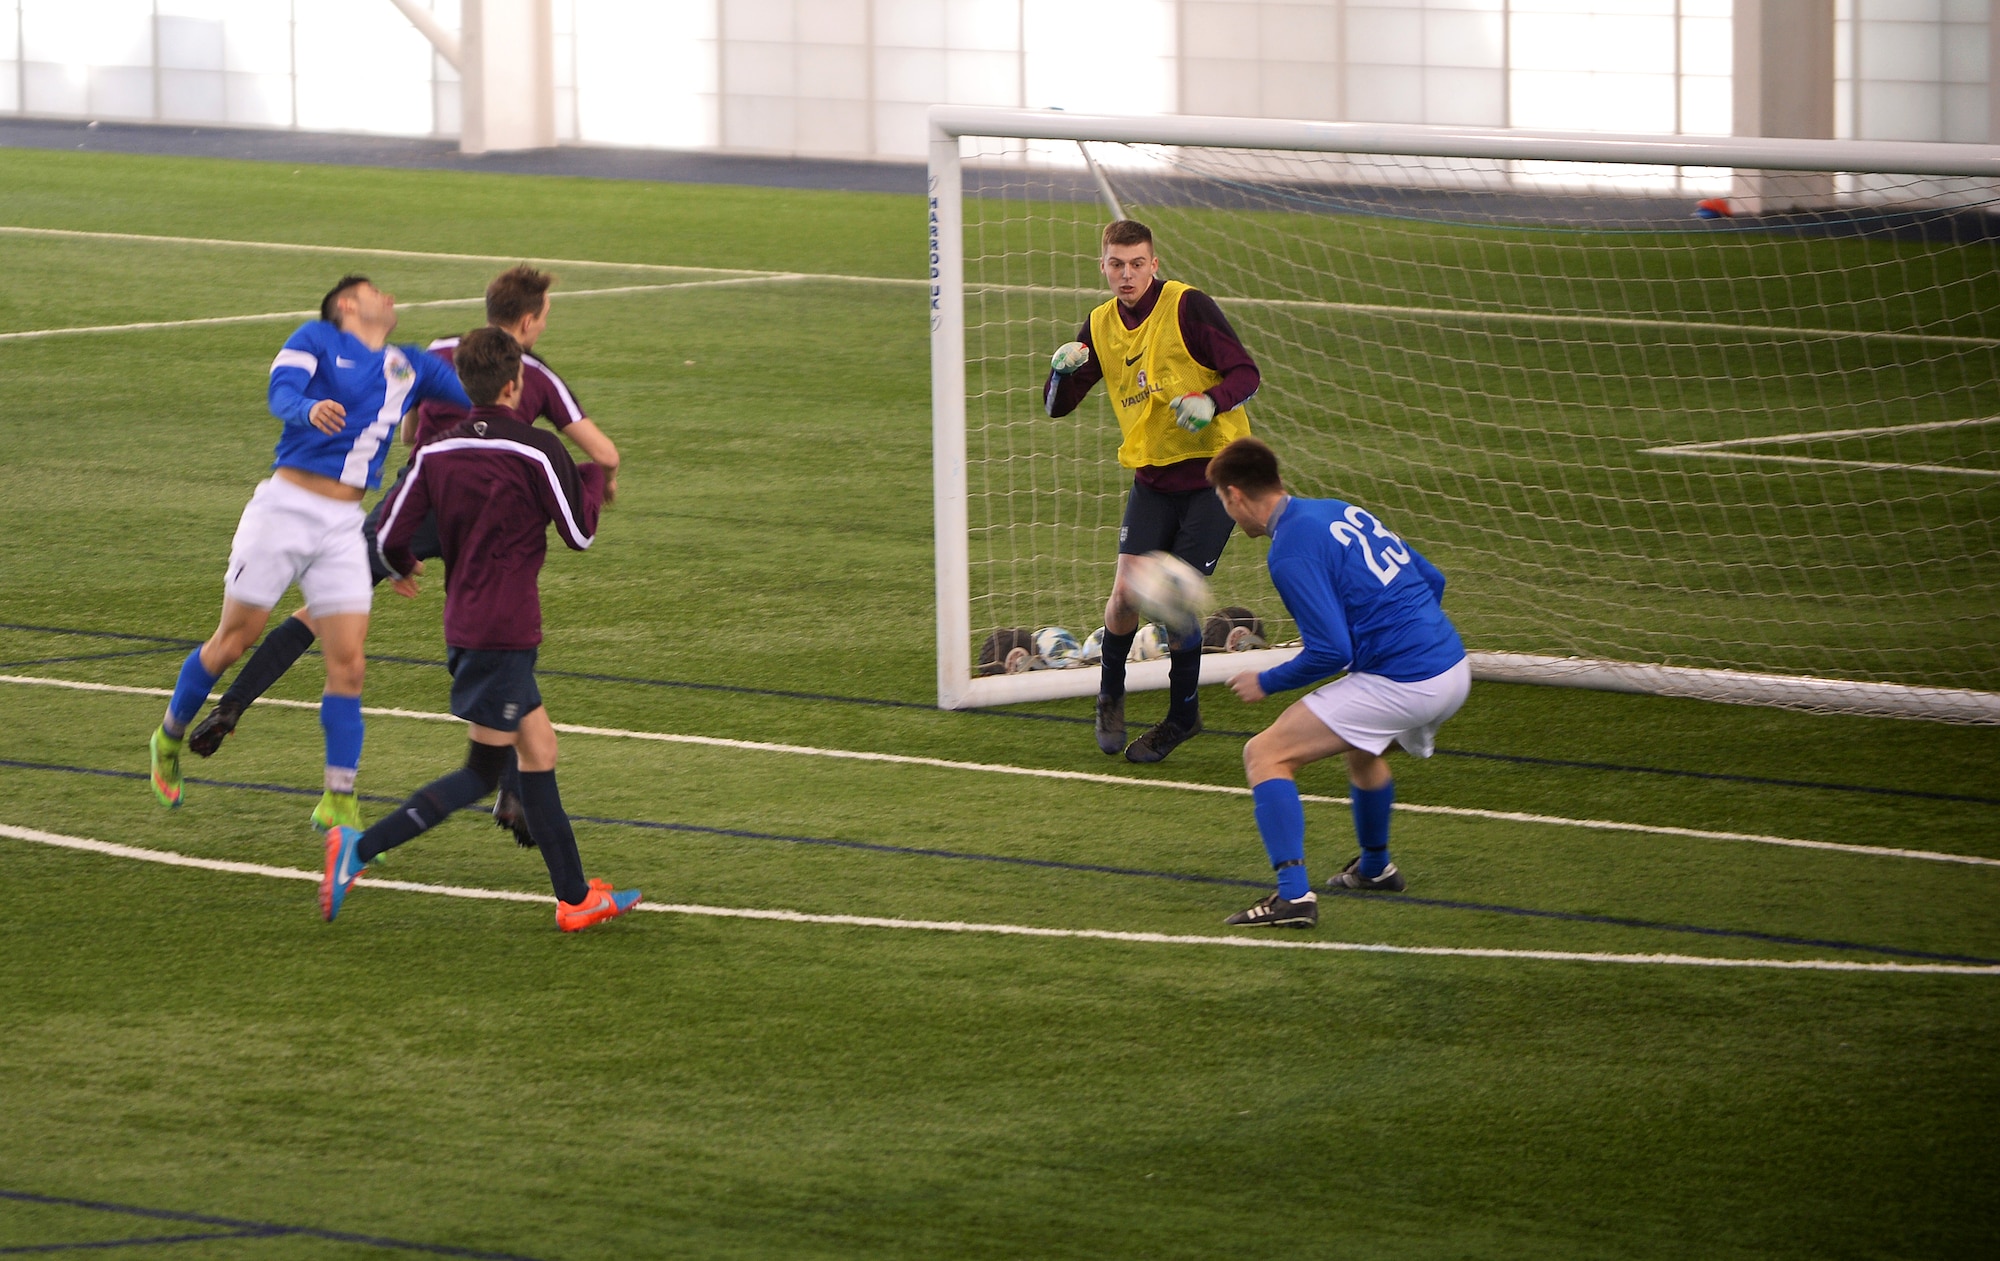 Maj. Doug Grabowski, a forward for the Liberty Football Club, attempts to score during a match against the world-ranked England Cerebral Palsy team at St. George’s Park, England, Jan. 25, 2015. Active duty members, dependents and high school students are welcome to join the Liberty Football Club. (U.S. Air Force photo by Staff Sgt. Emerson Nuñez/Released)